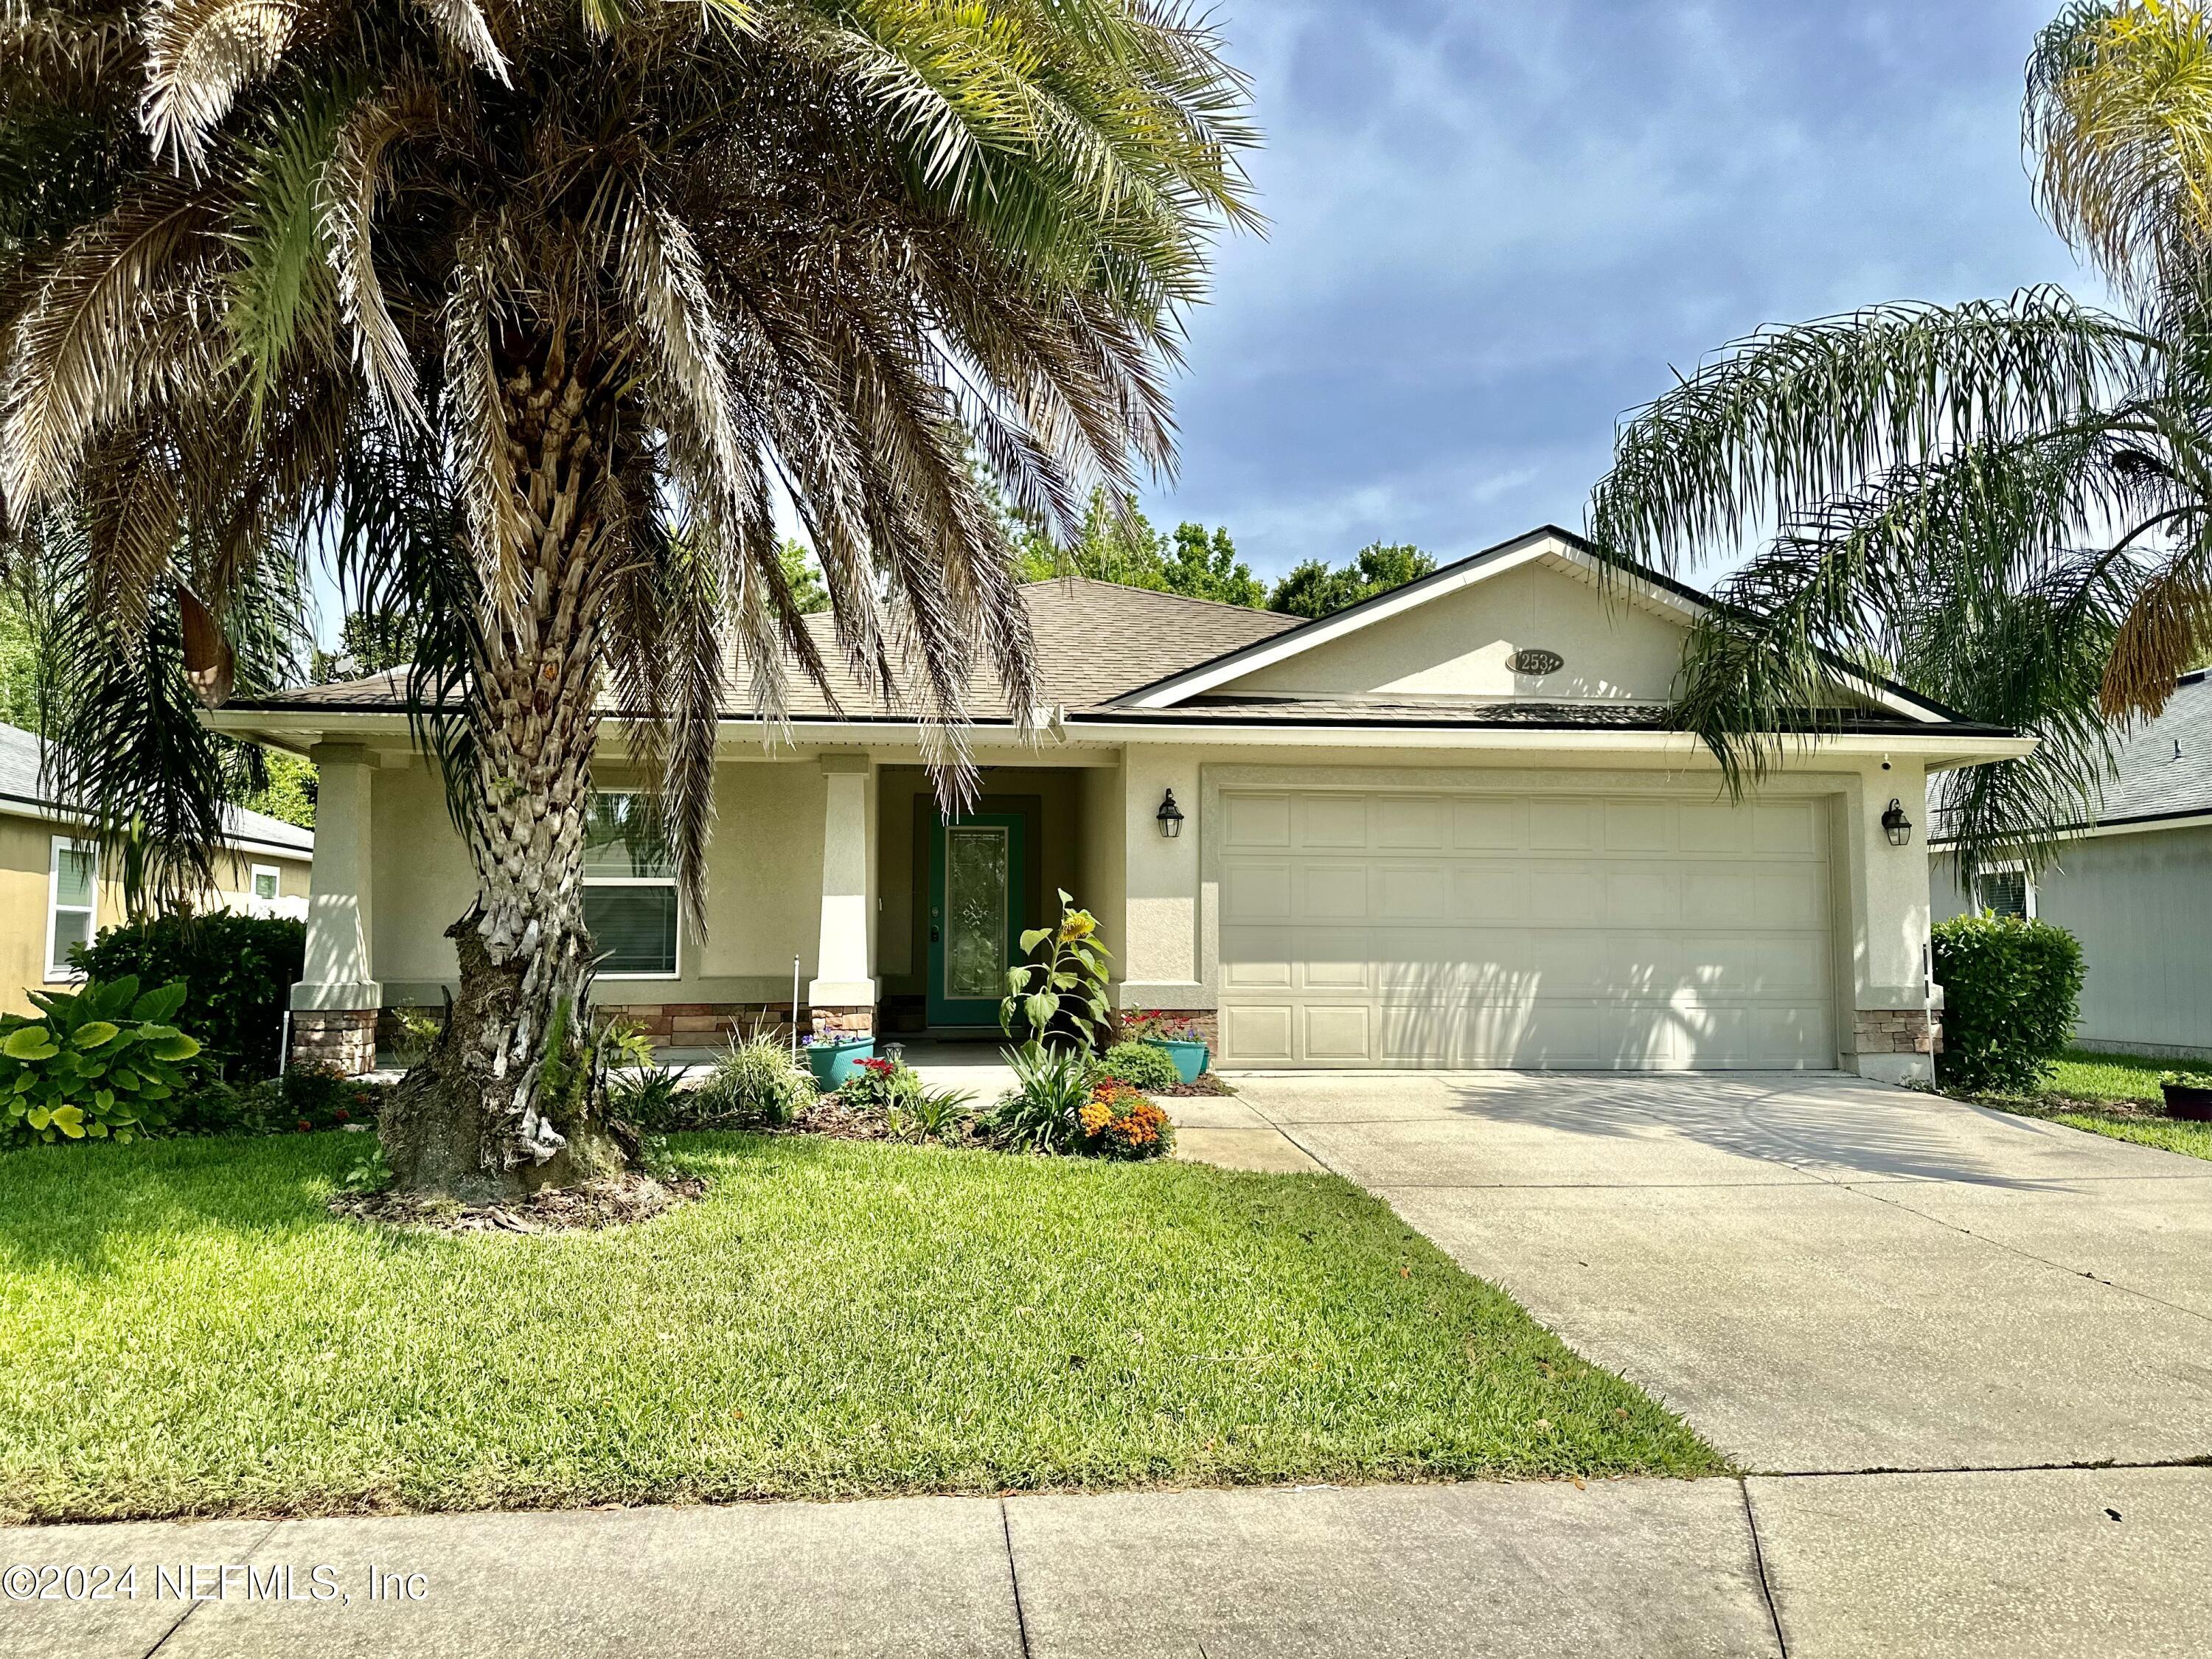 St Johns, FL home for sale located at 253 W Adelaide Drive, St Johns, FL 32259